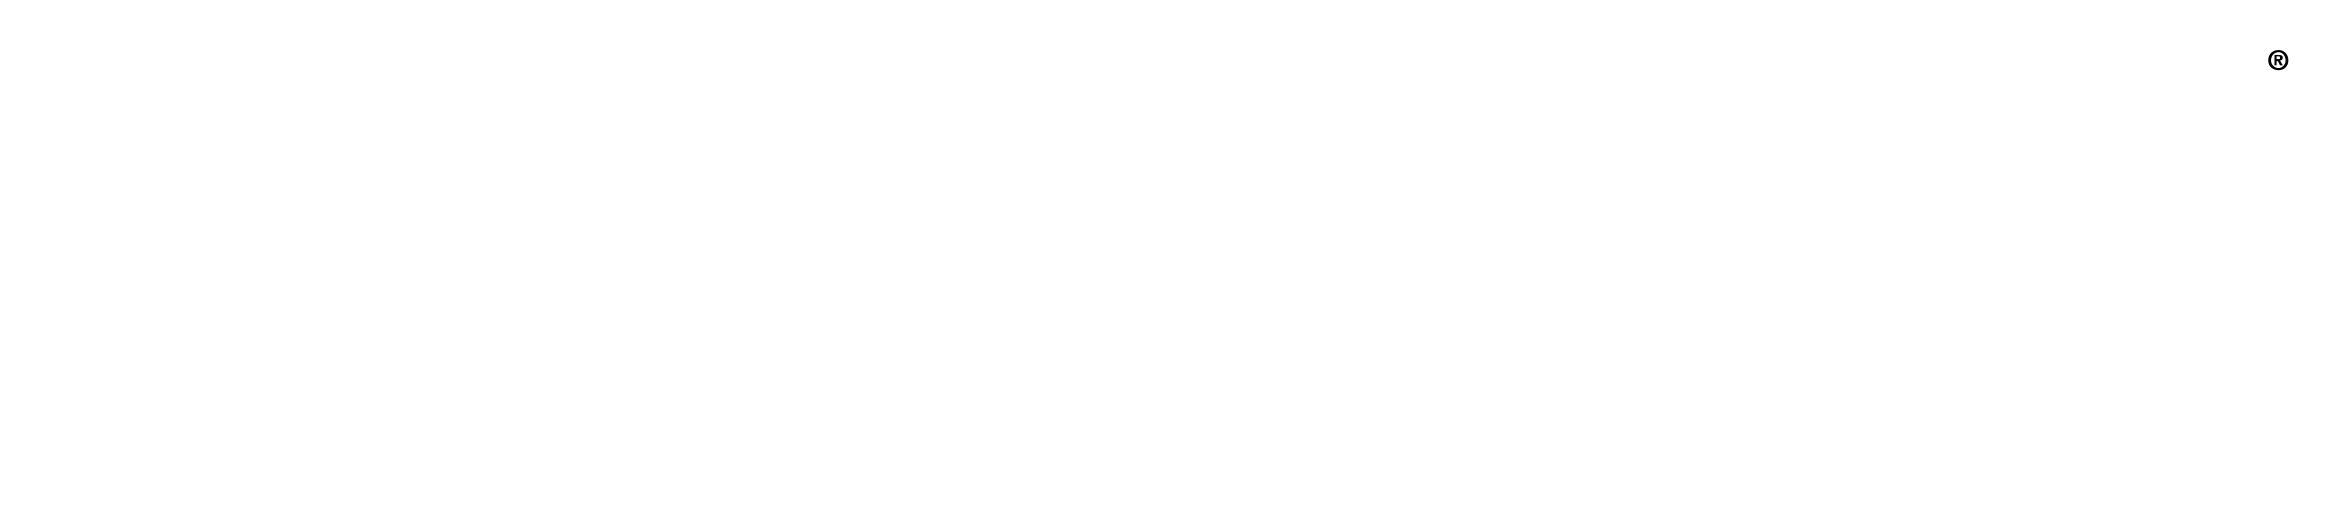 Download Babies R Us Logo Black And White 24 Hour Fitness Logo White Png Image With No Background Pngkey Com